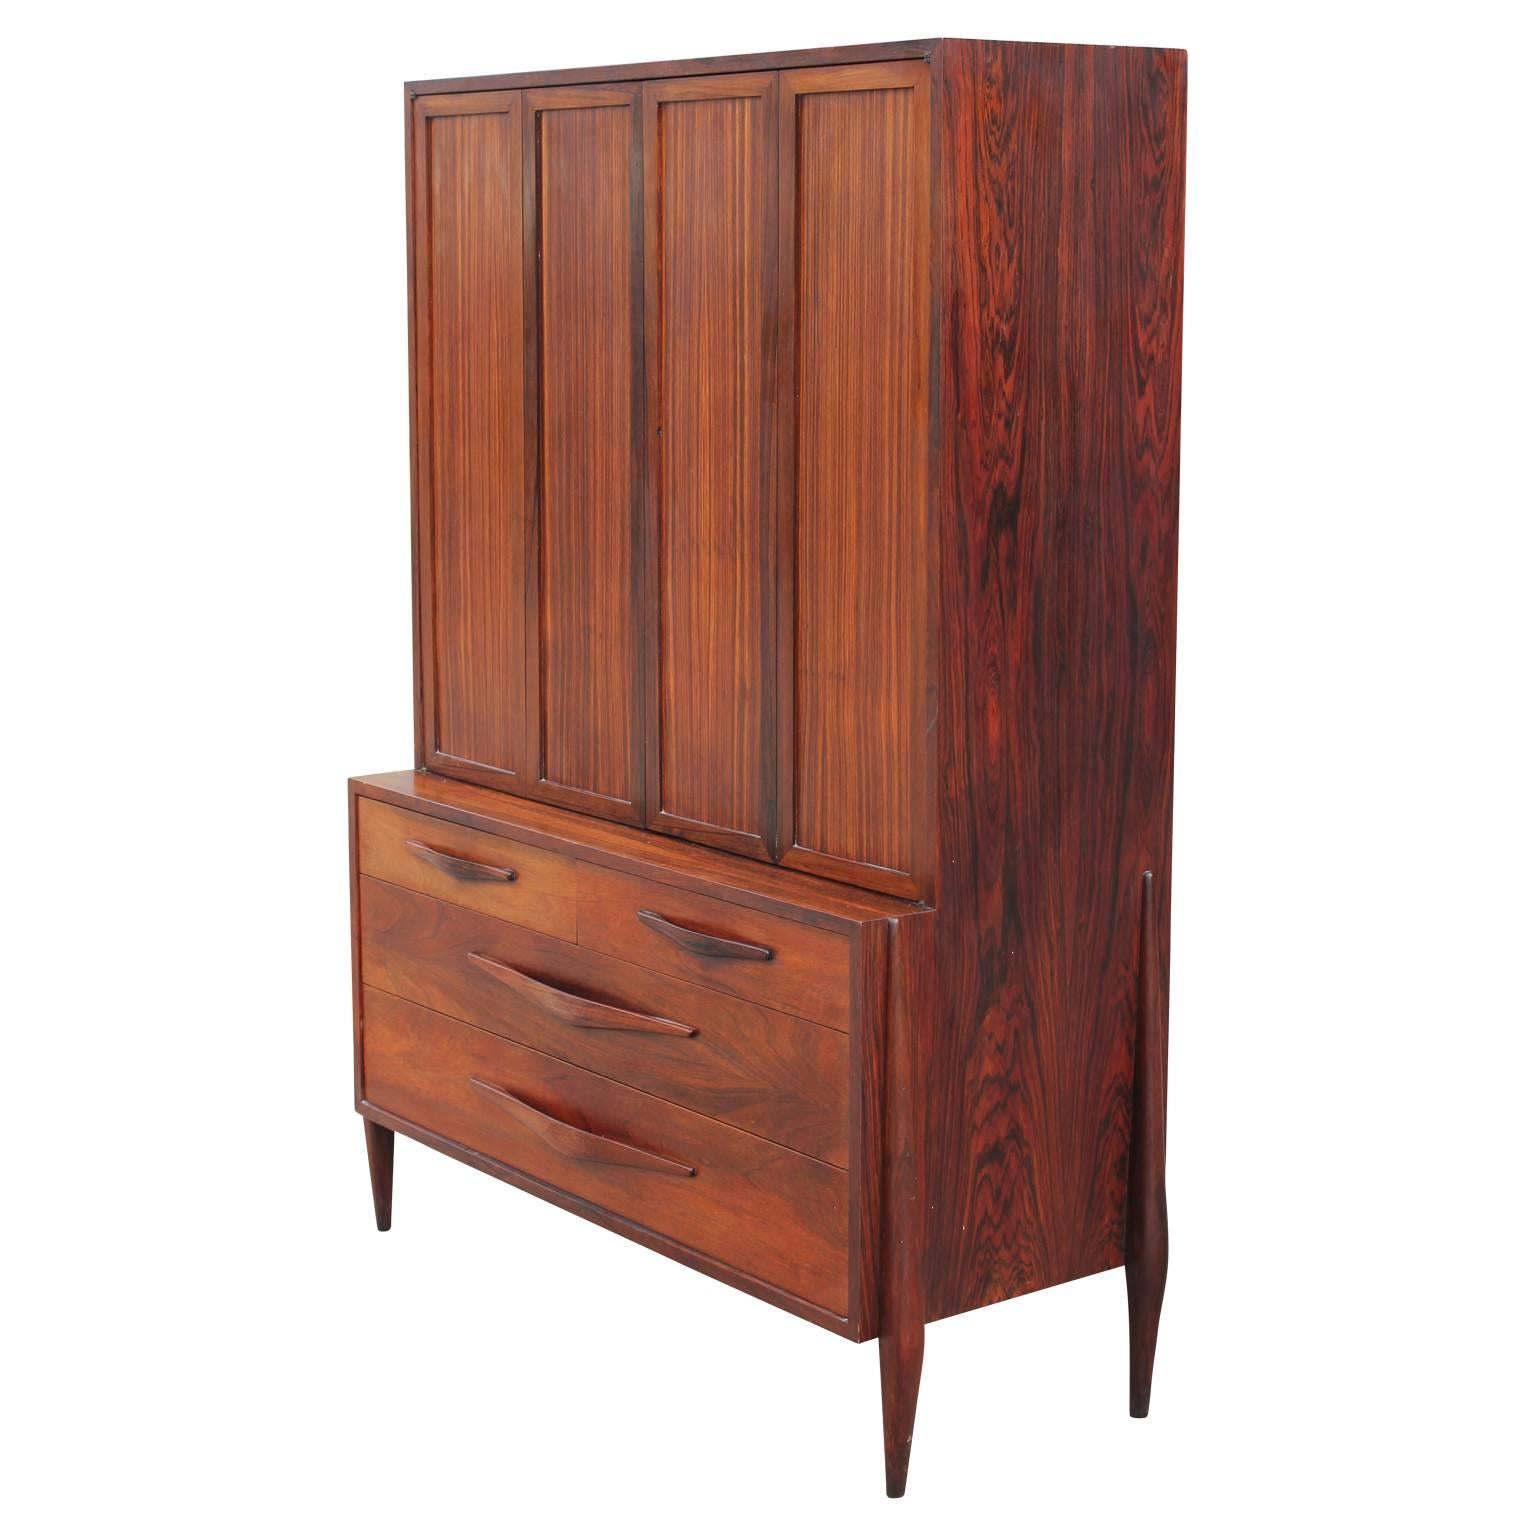 Gorgeous Danish or Italian hutch or buffet made from rosewood with a stunning grain. Perfect for an eye-catching entertaining piece or storage piece.